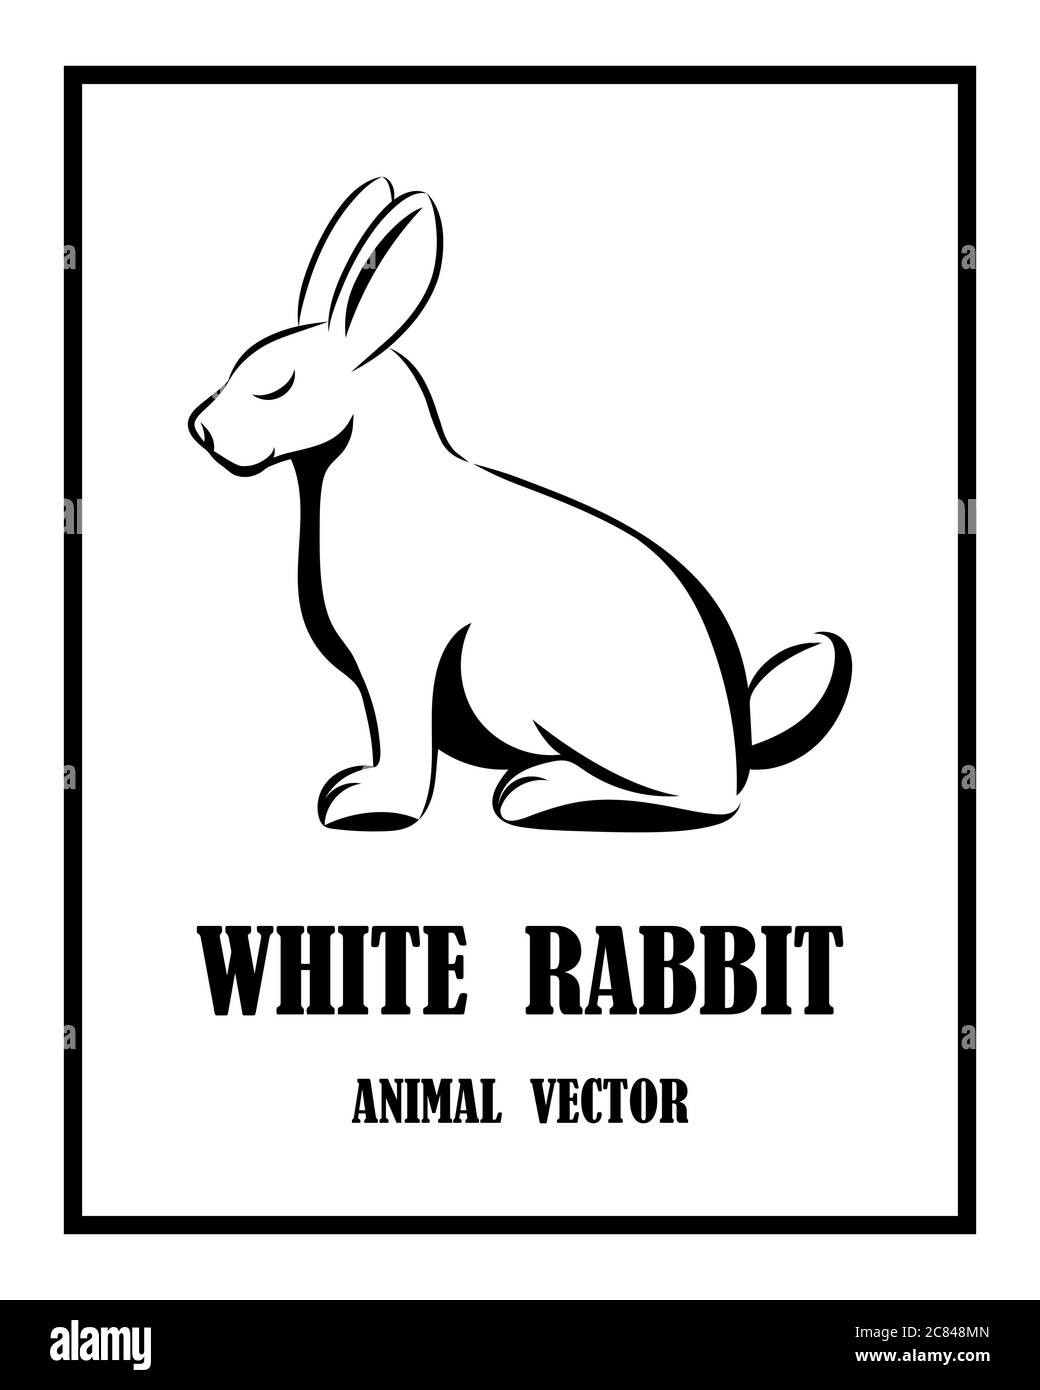 Vector Line Art Illustration of a rabbit. It is sitting. It is black and white. Stock Vector